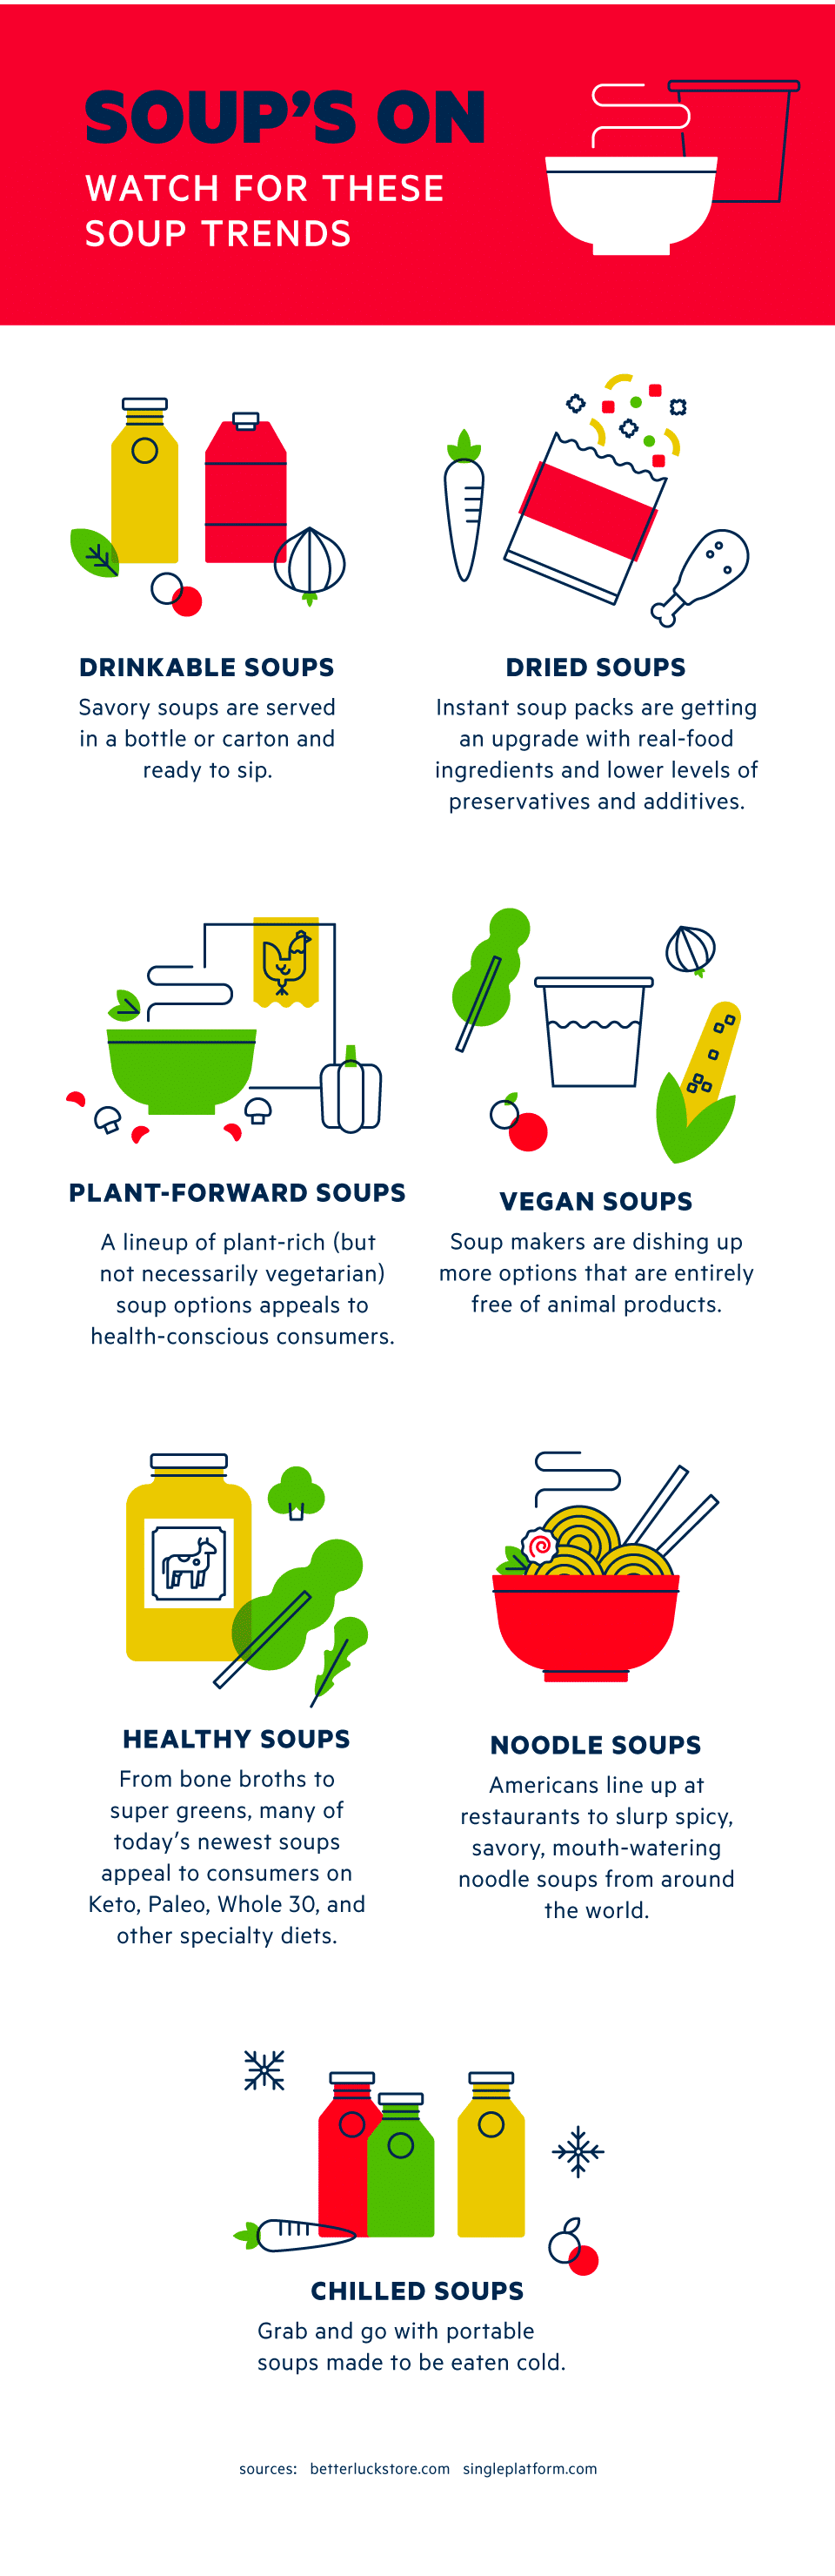 Soup's On - Watch for These Soup Trends